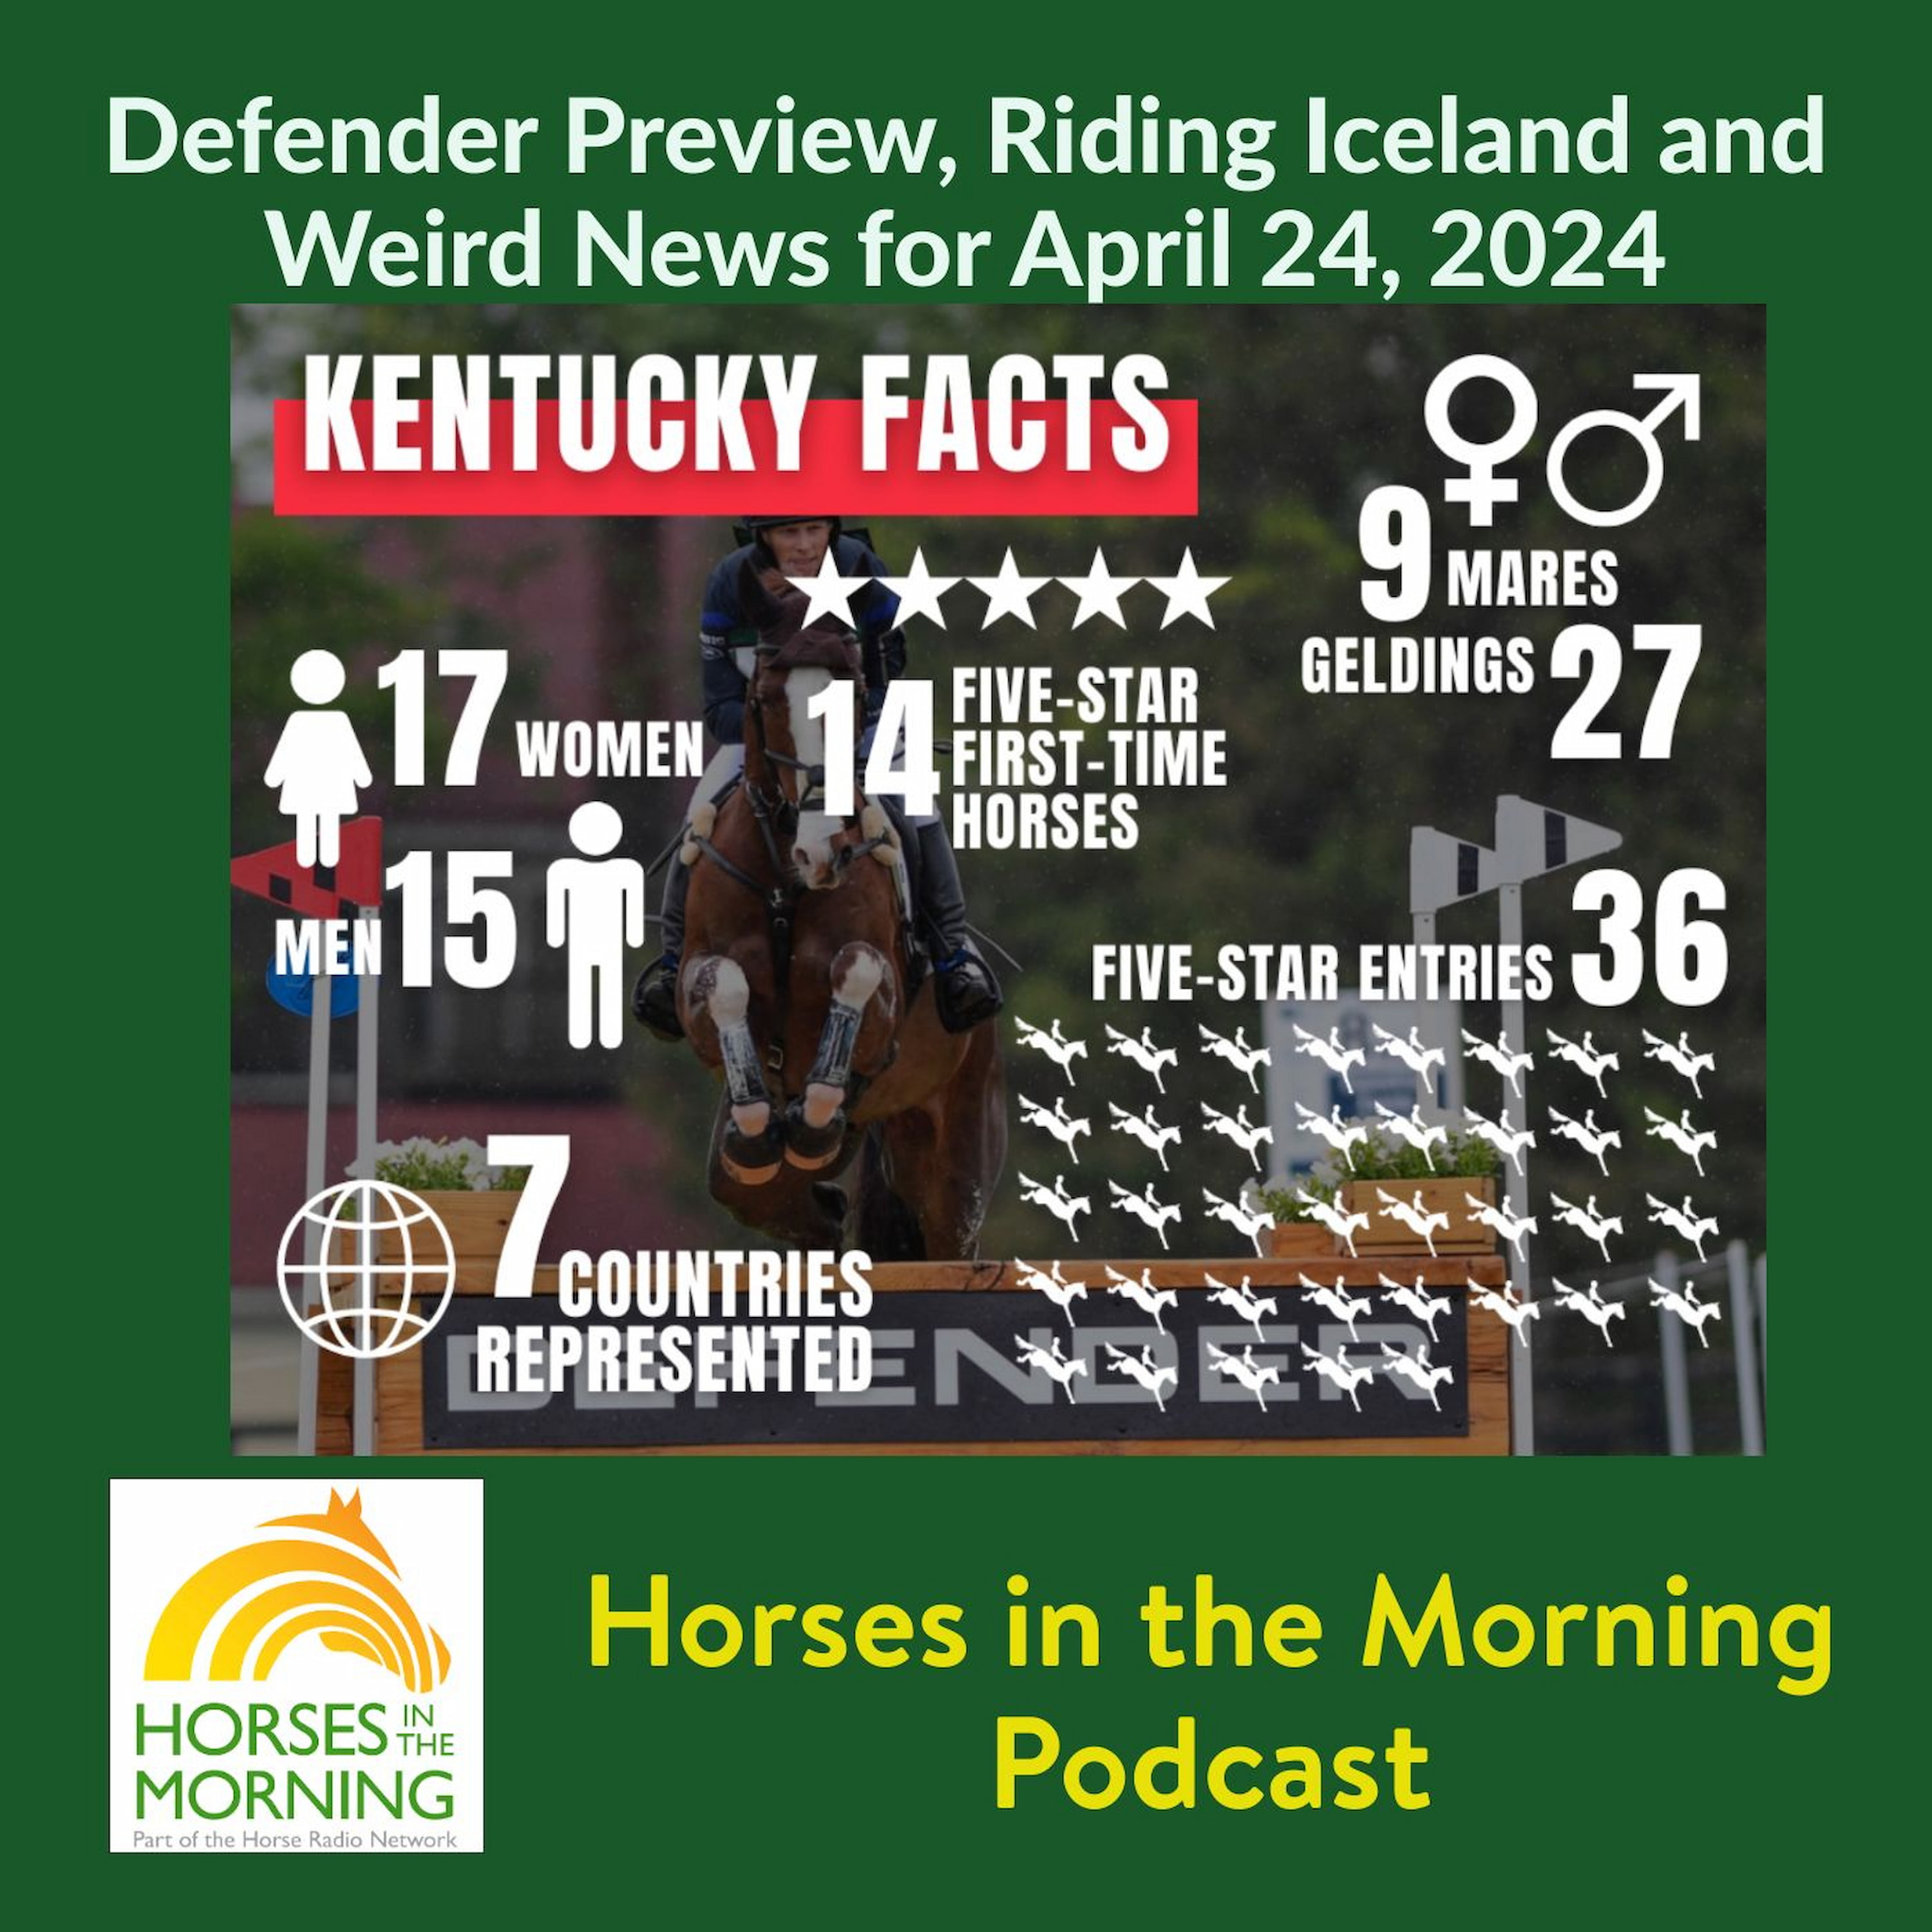 HITM for April 24, 2024: Defender Preview, Riding Iceland and Weird News